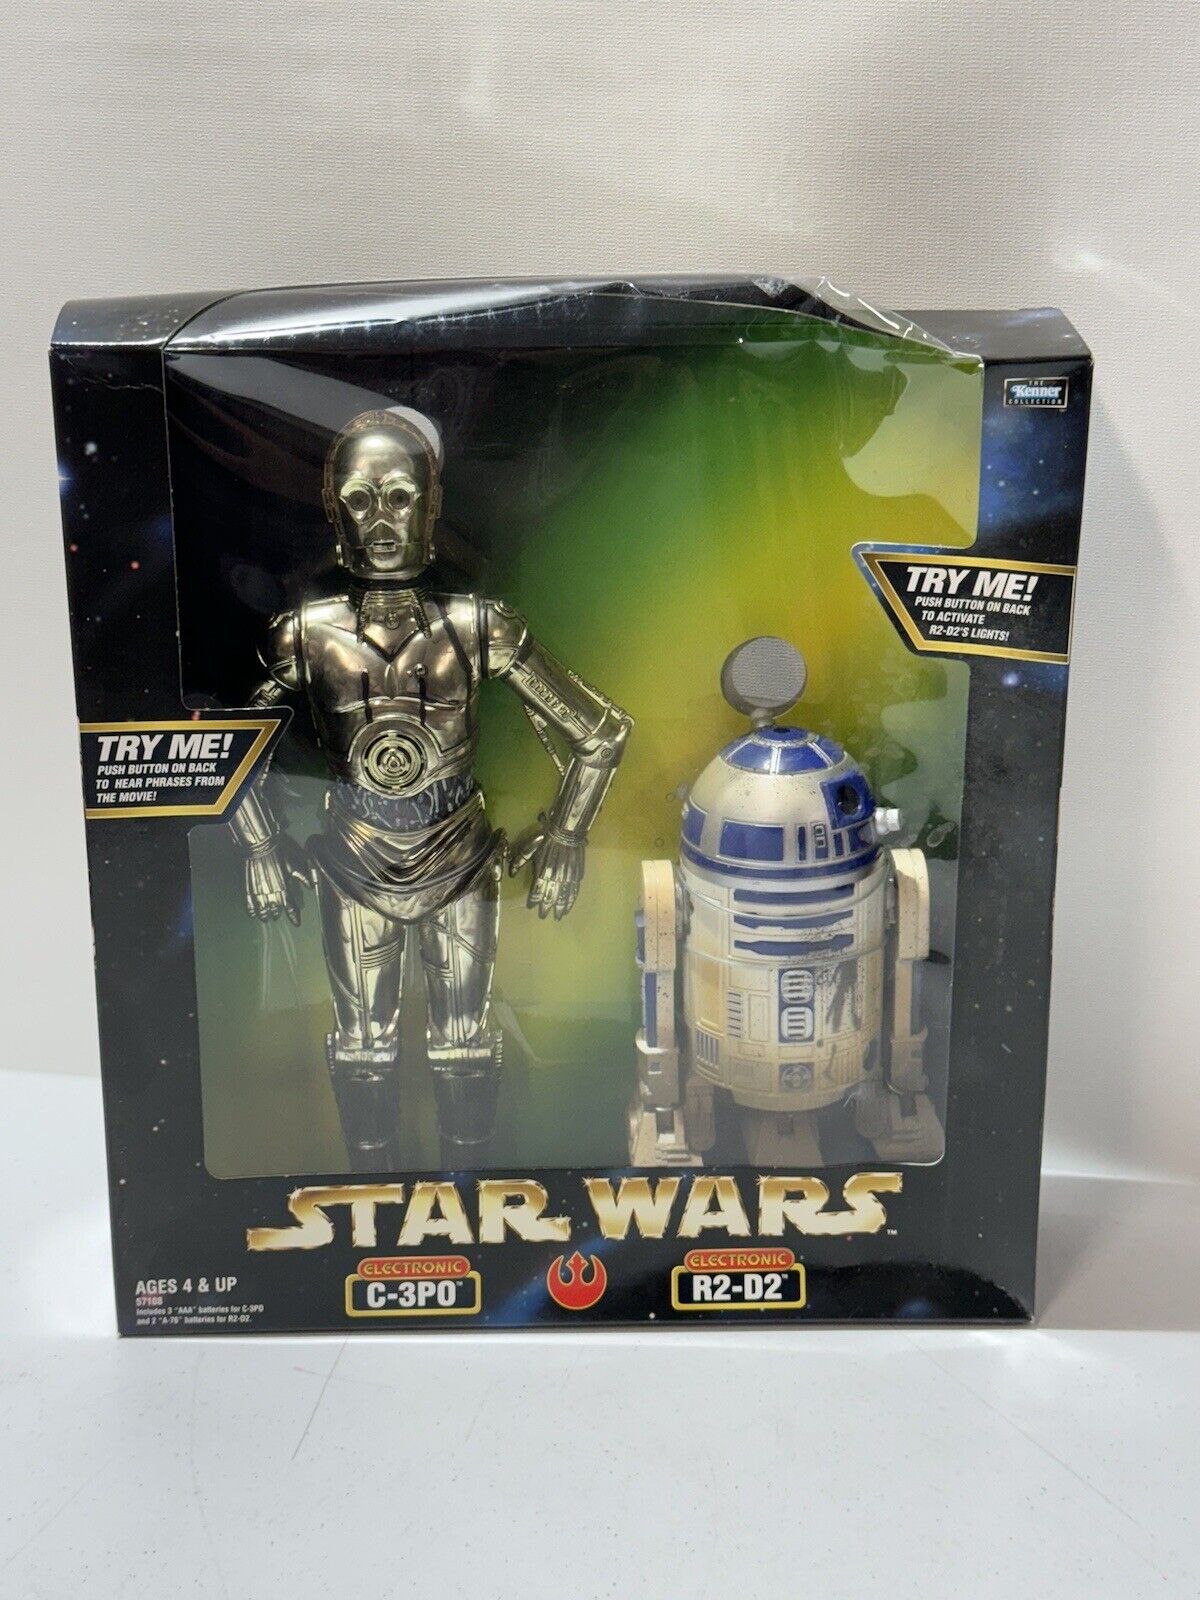 Star Wars 12” Action  Collection - Electronic C-3PO & R2-D2 - New in box Vintage